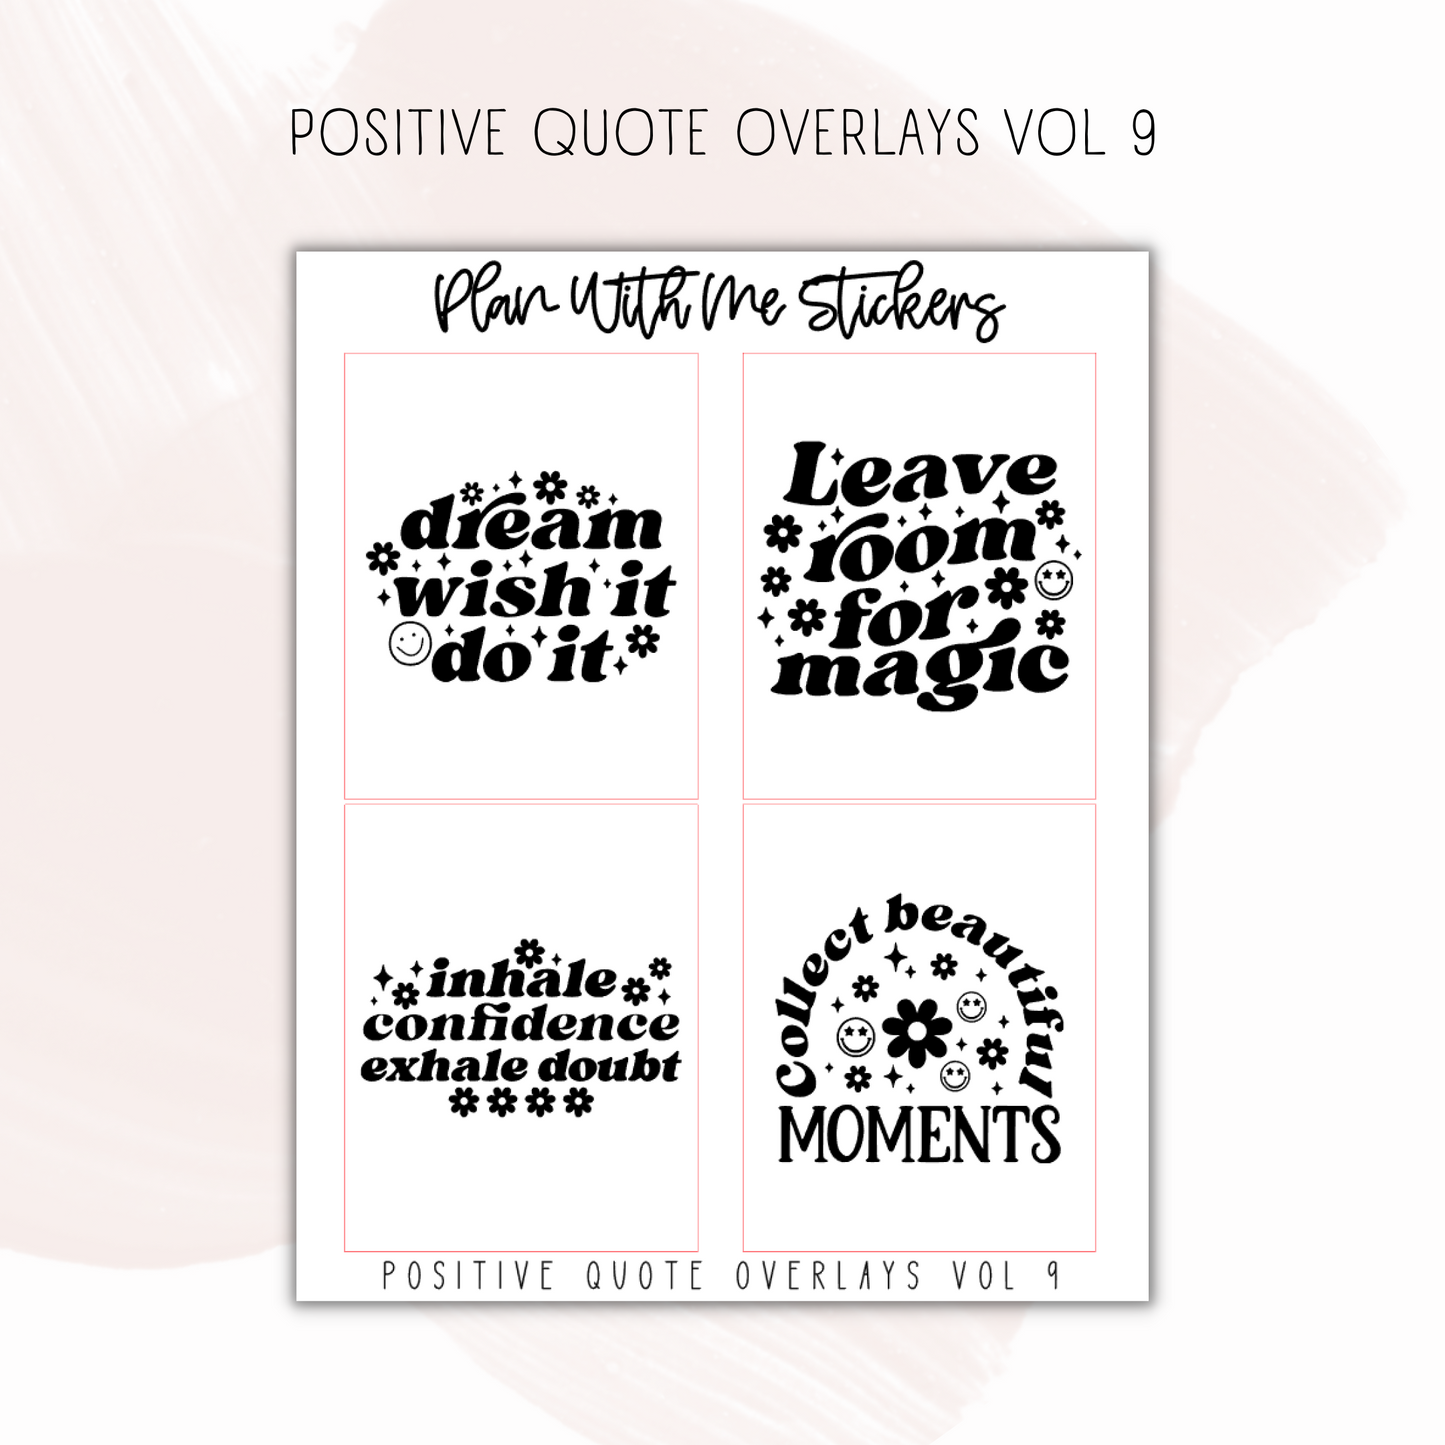 Positive Quote Overlays Vol 7